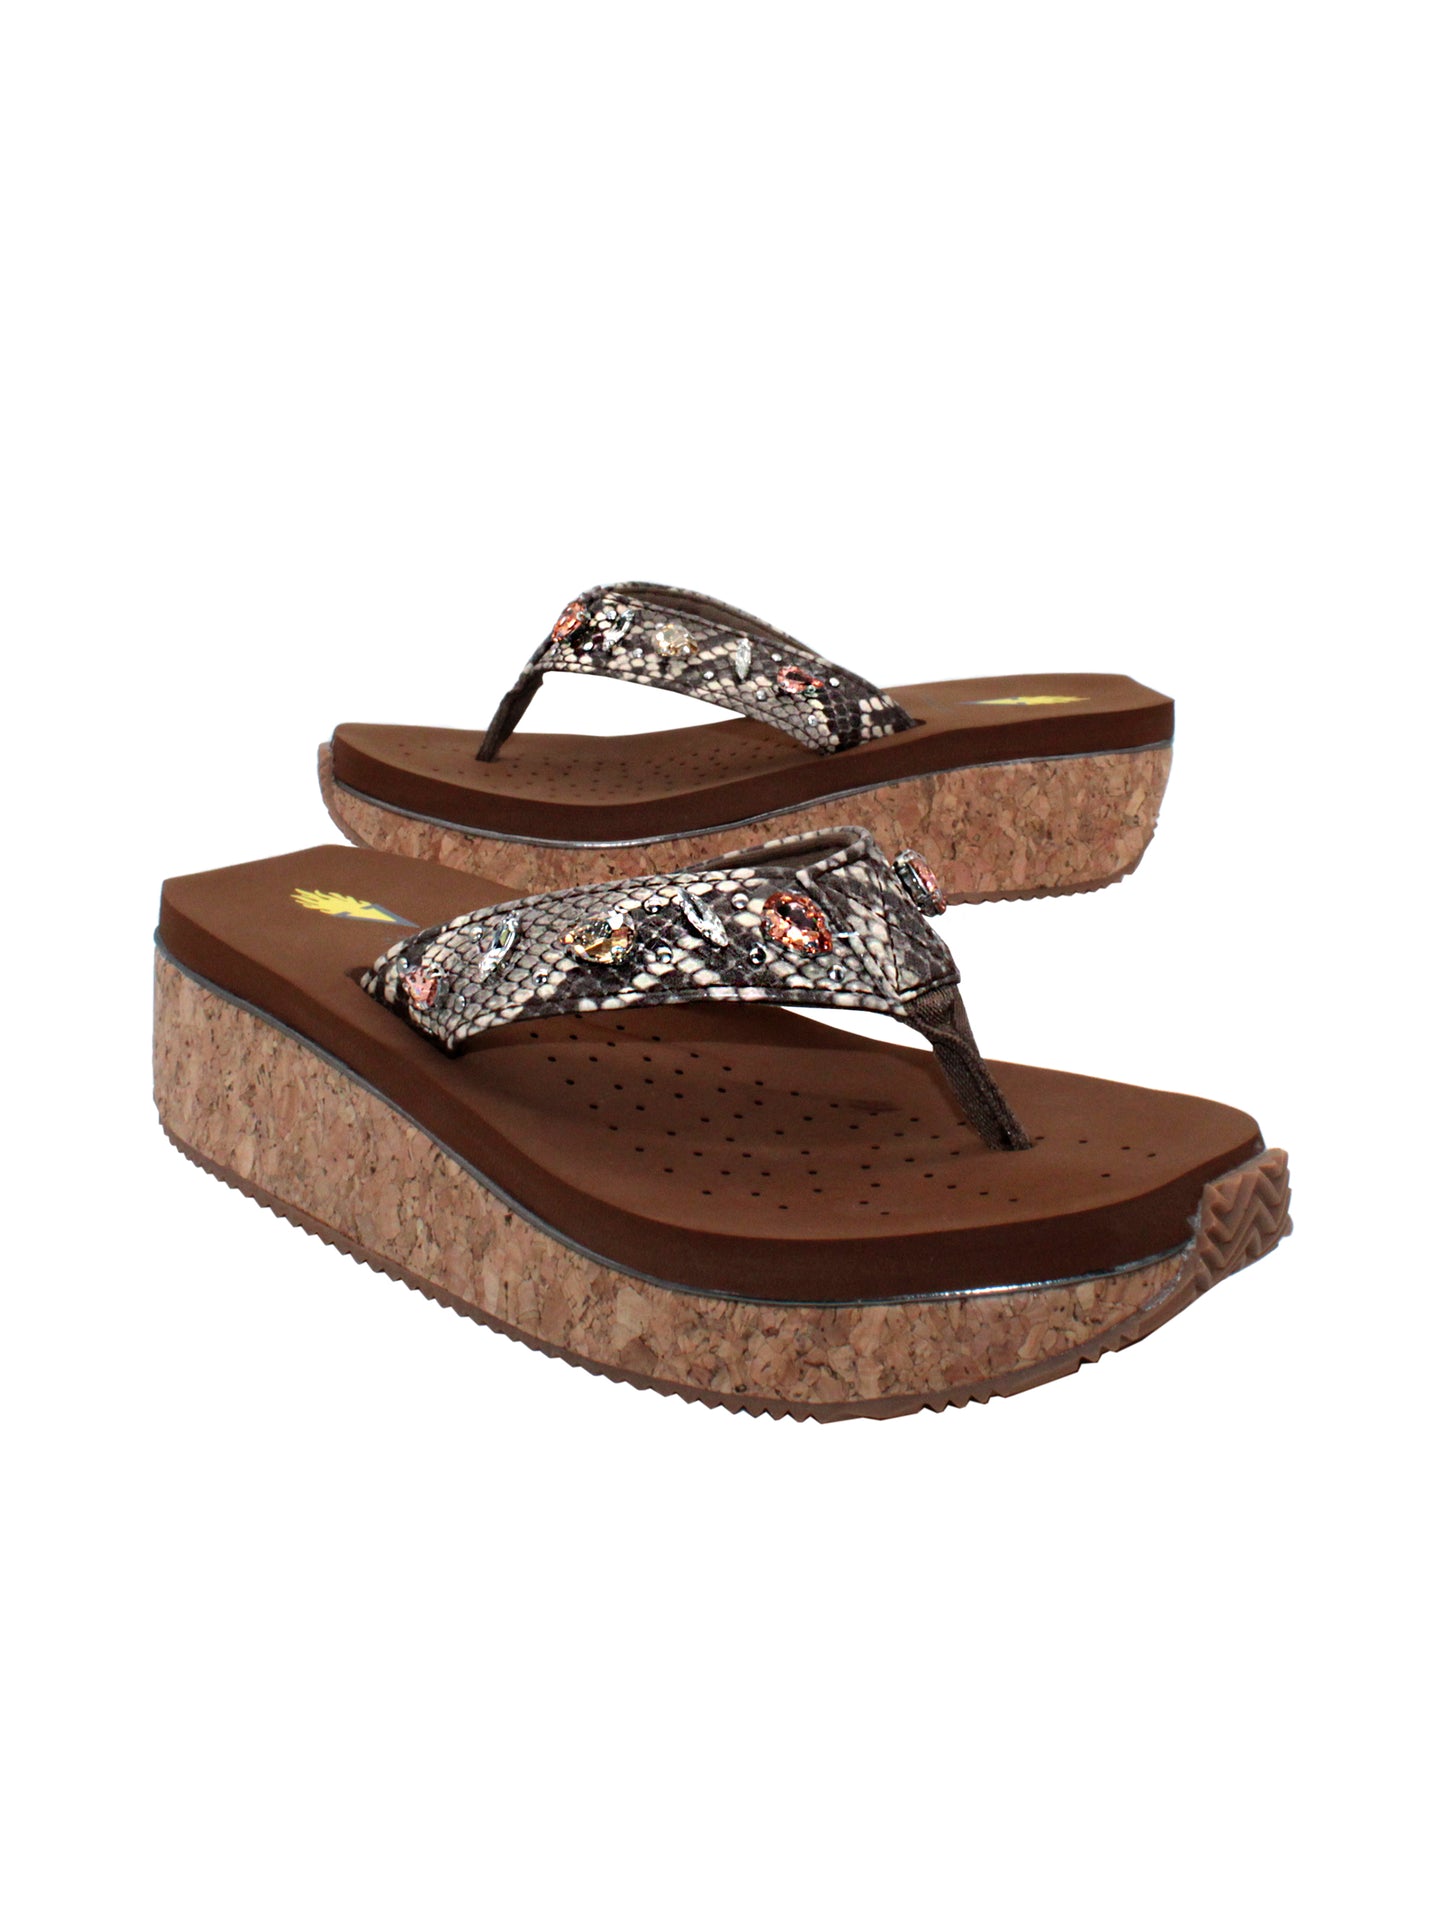 The Grand thong wedge sandal by Volatile is crafted in a textured synthetic python material adorned with cased jewels and studs. They feature Volatile’s signature ultra comfort EVA insole for all day comfort, padded textile lining and nonskid rubber traction outsoles to keep you at your best on your feet. Feel free to dress these up or down for any occasion. 2